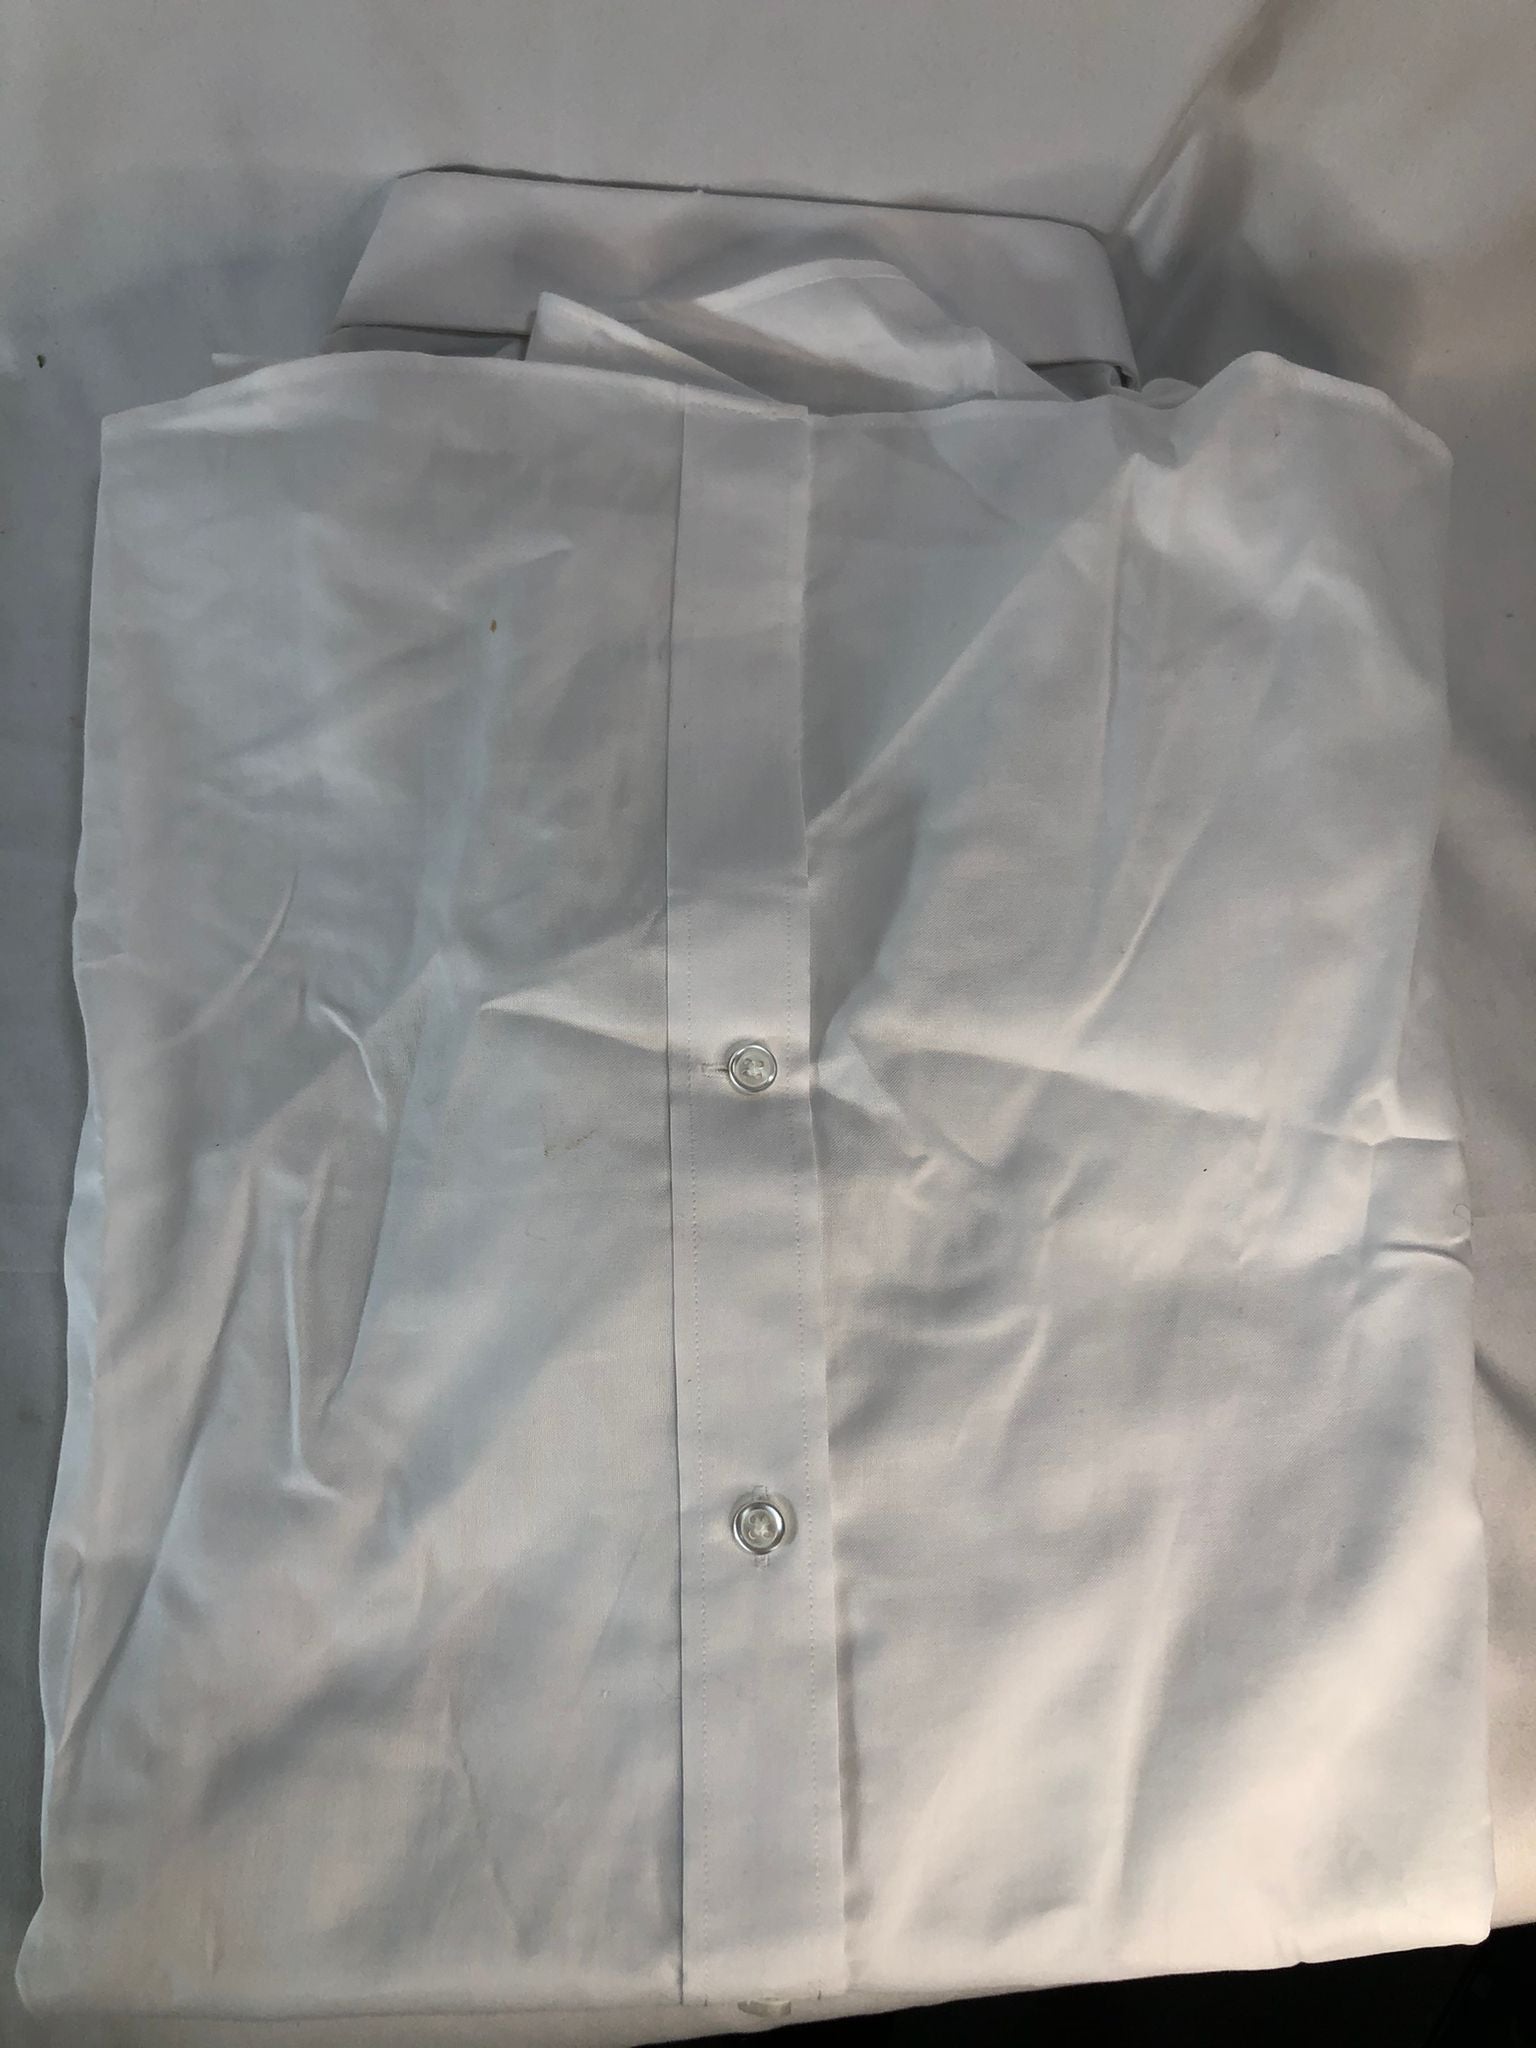 "As is" T.Hilfiger Men's Fused collar Dress shirt!